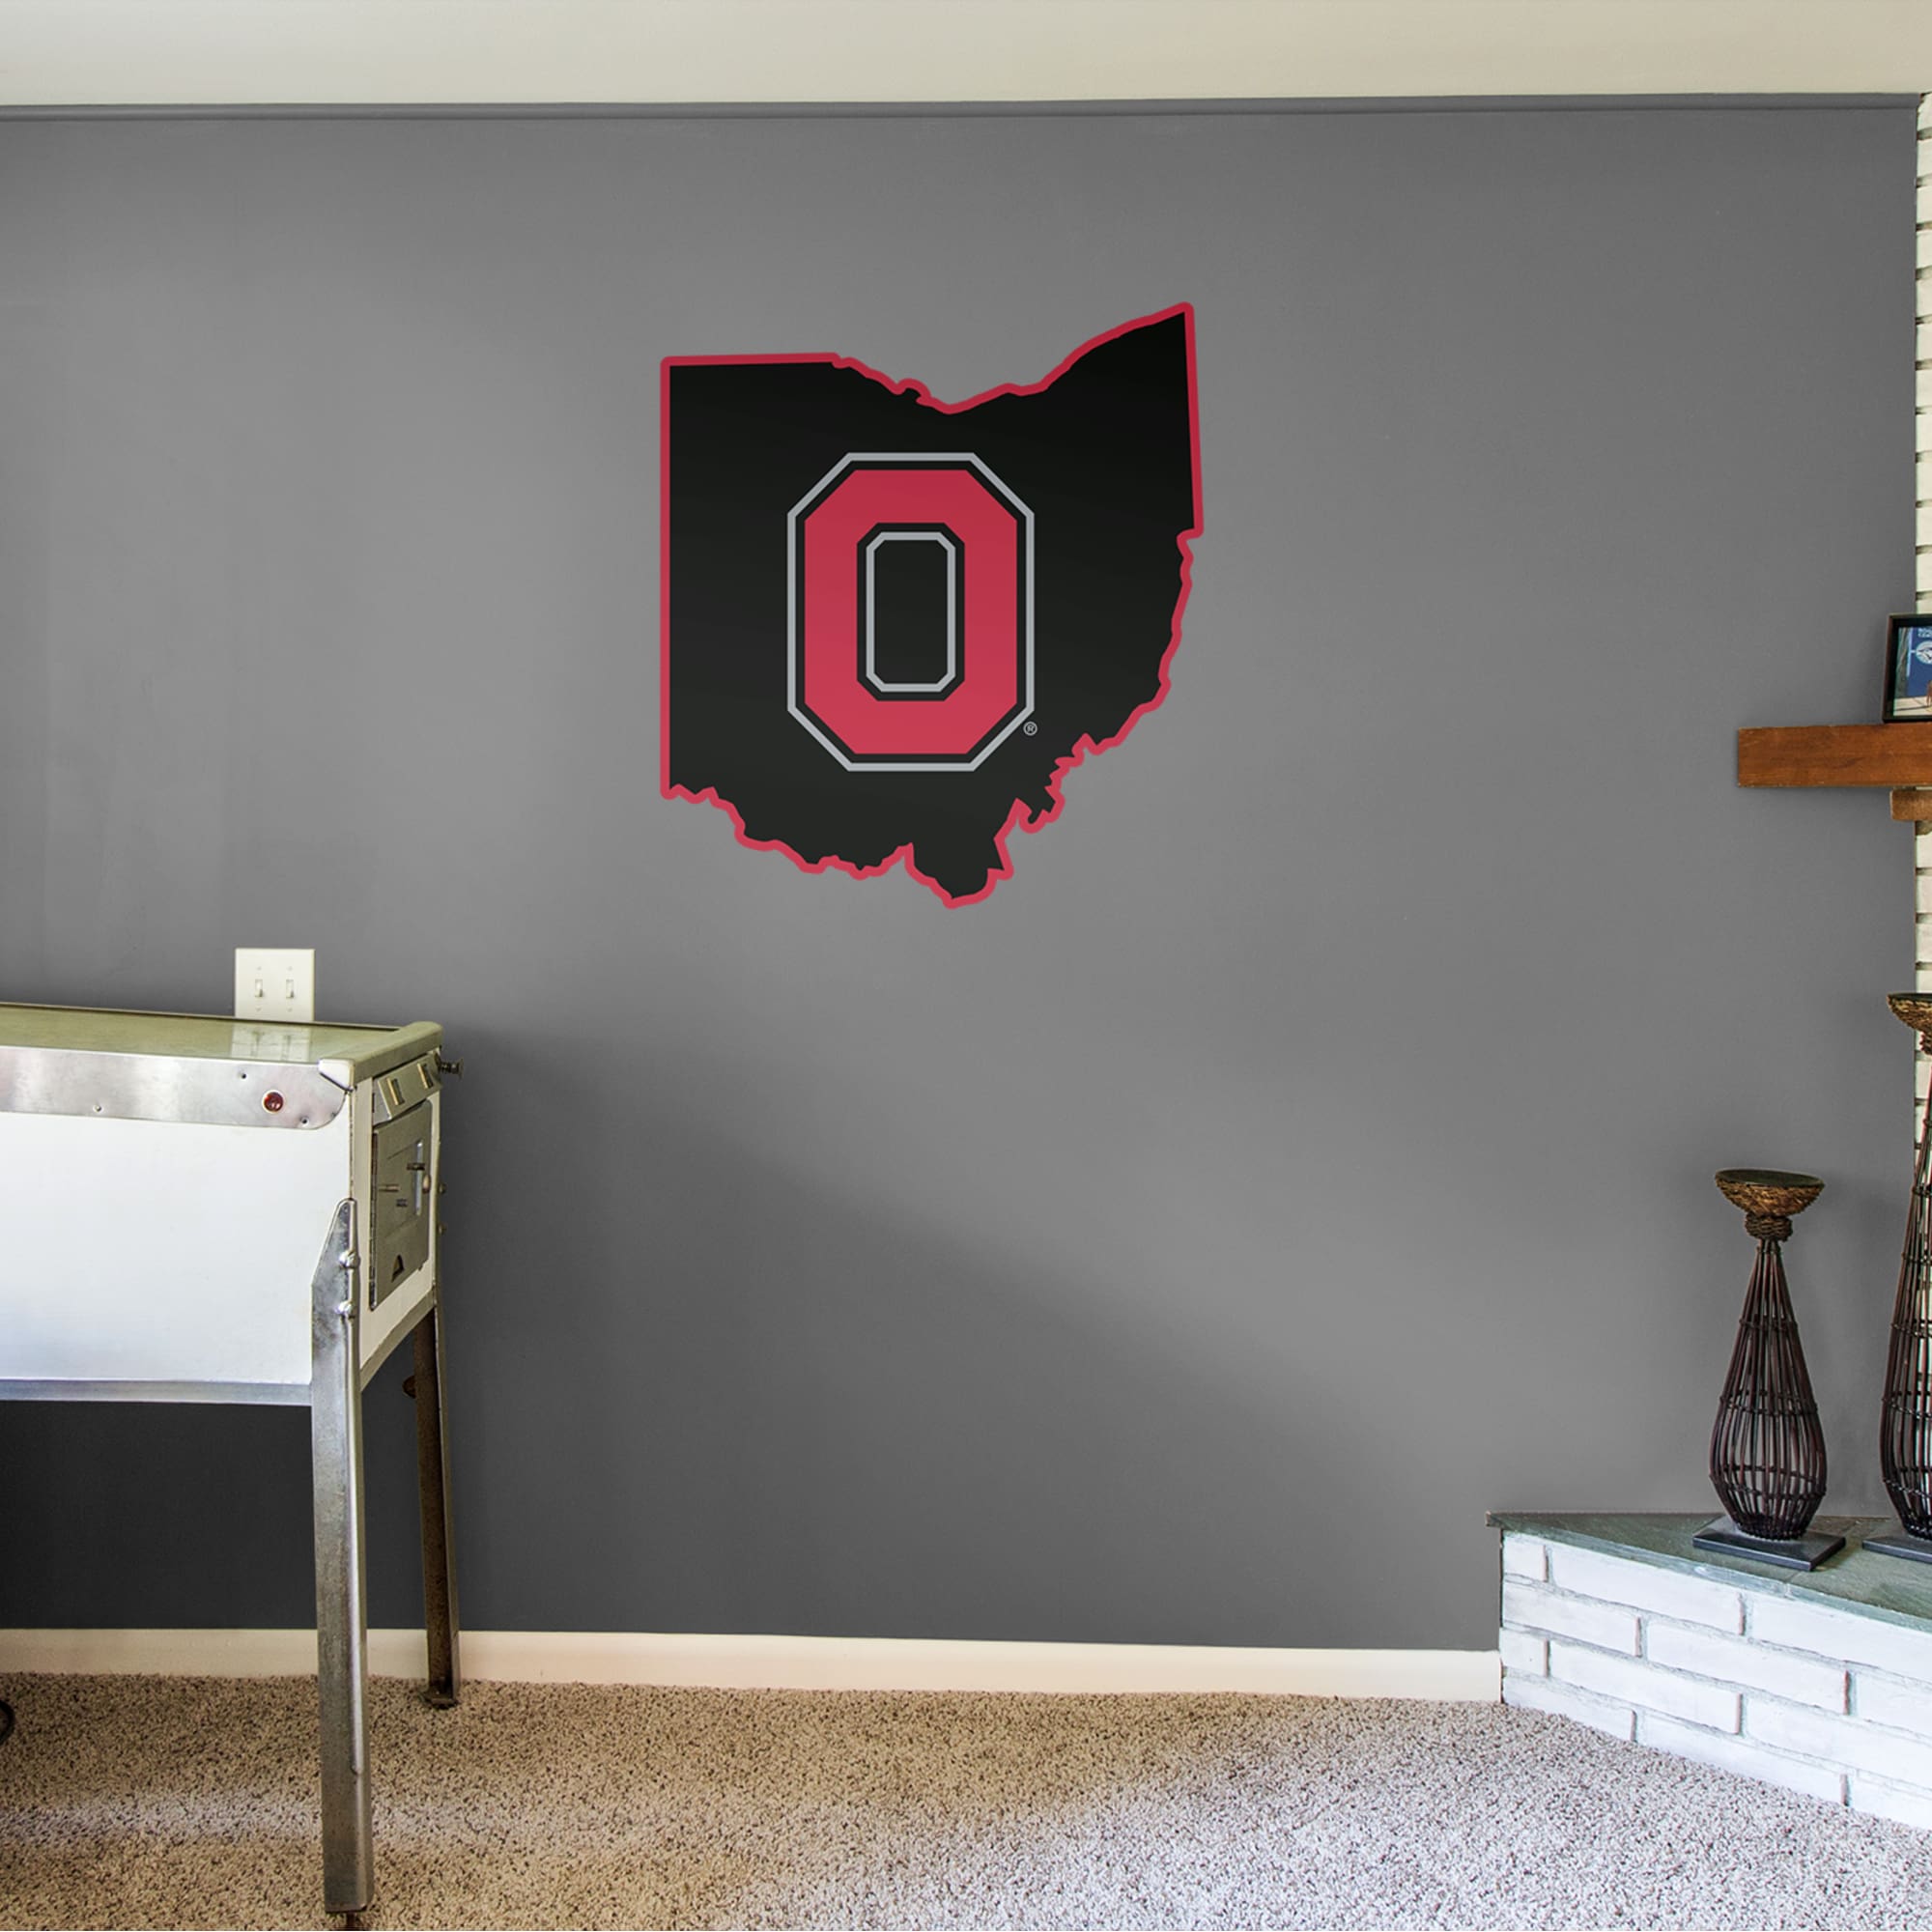 Ohio State Buckeyes: State of Ohio - Officially Licensed Removable Wall Decal 34.0"W x 38.0"H by Fathead | Vinyl